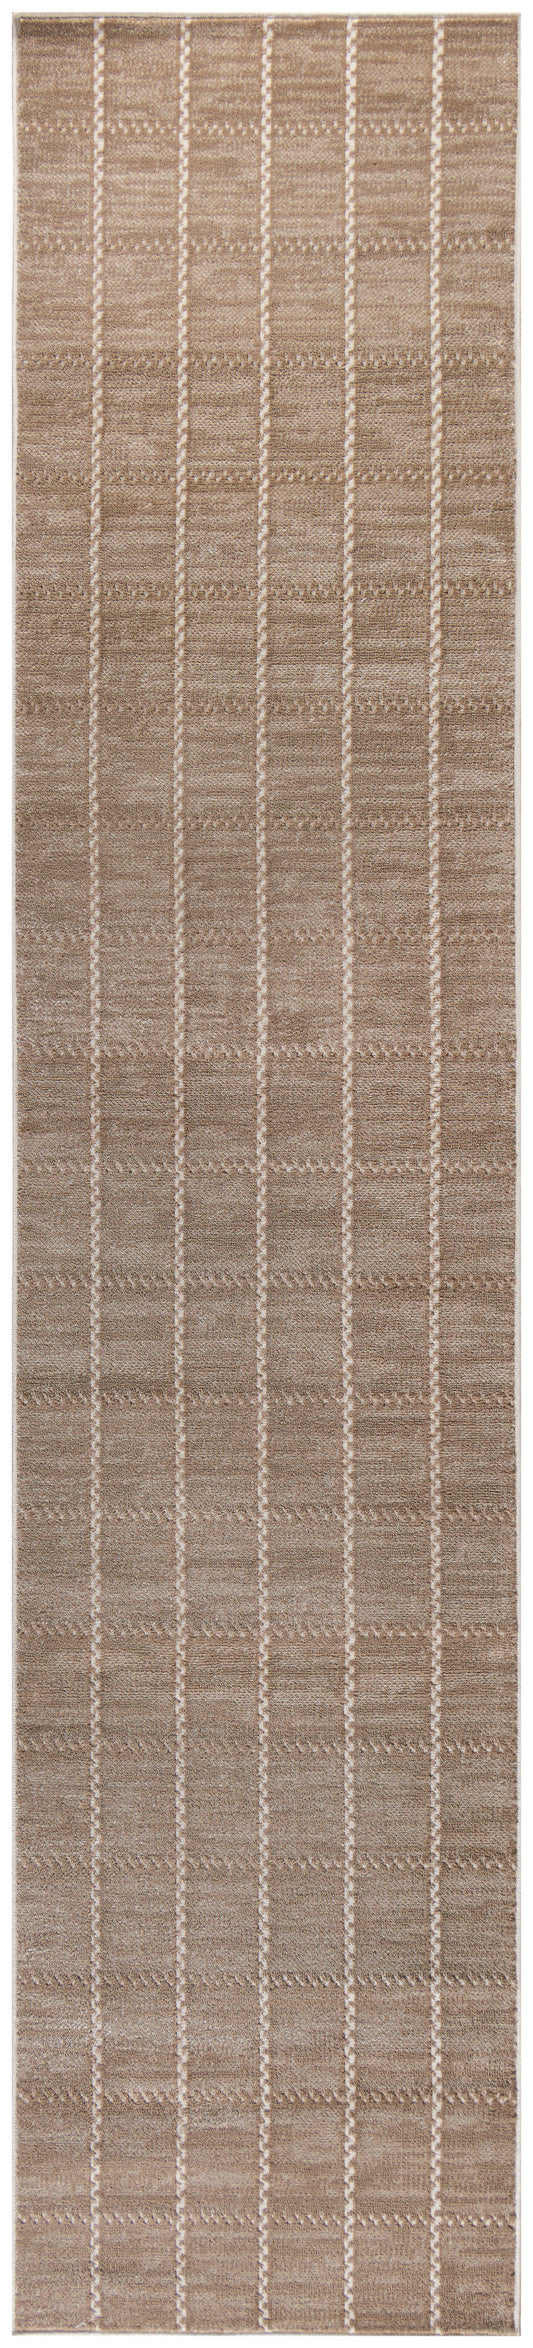 Nourison Home Serenity Home SRH05 Mocha Ivory Contemporary Woven Rug